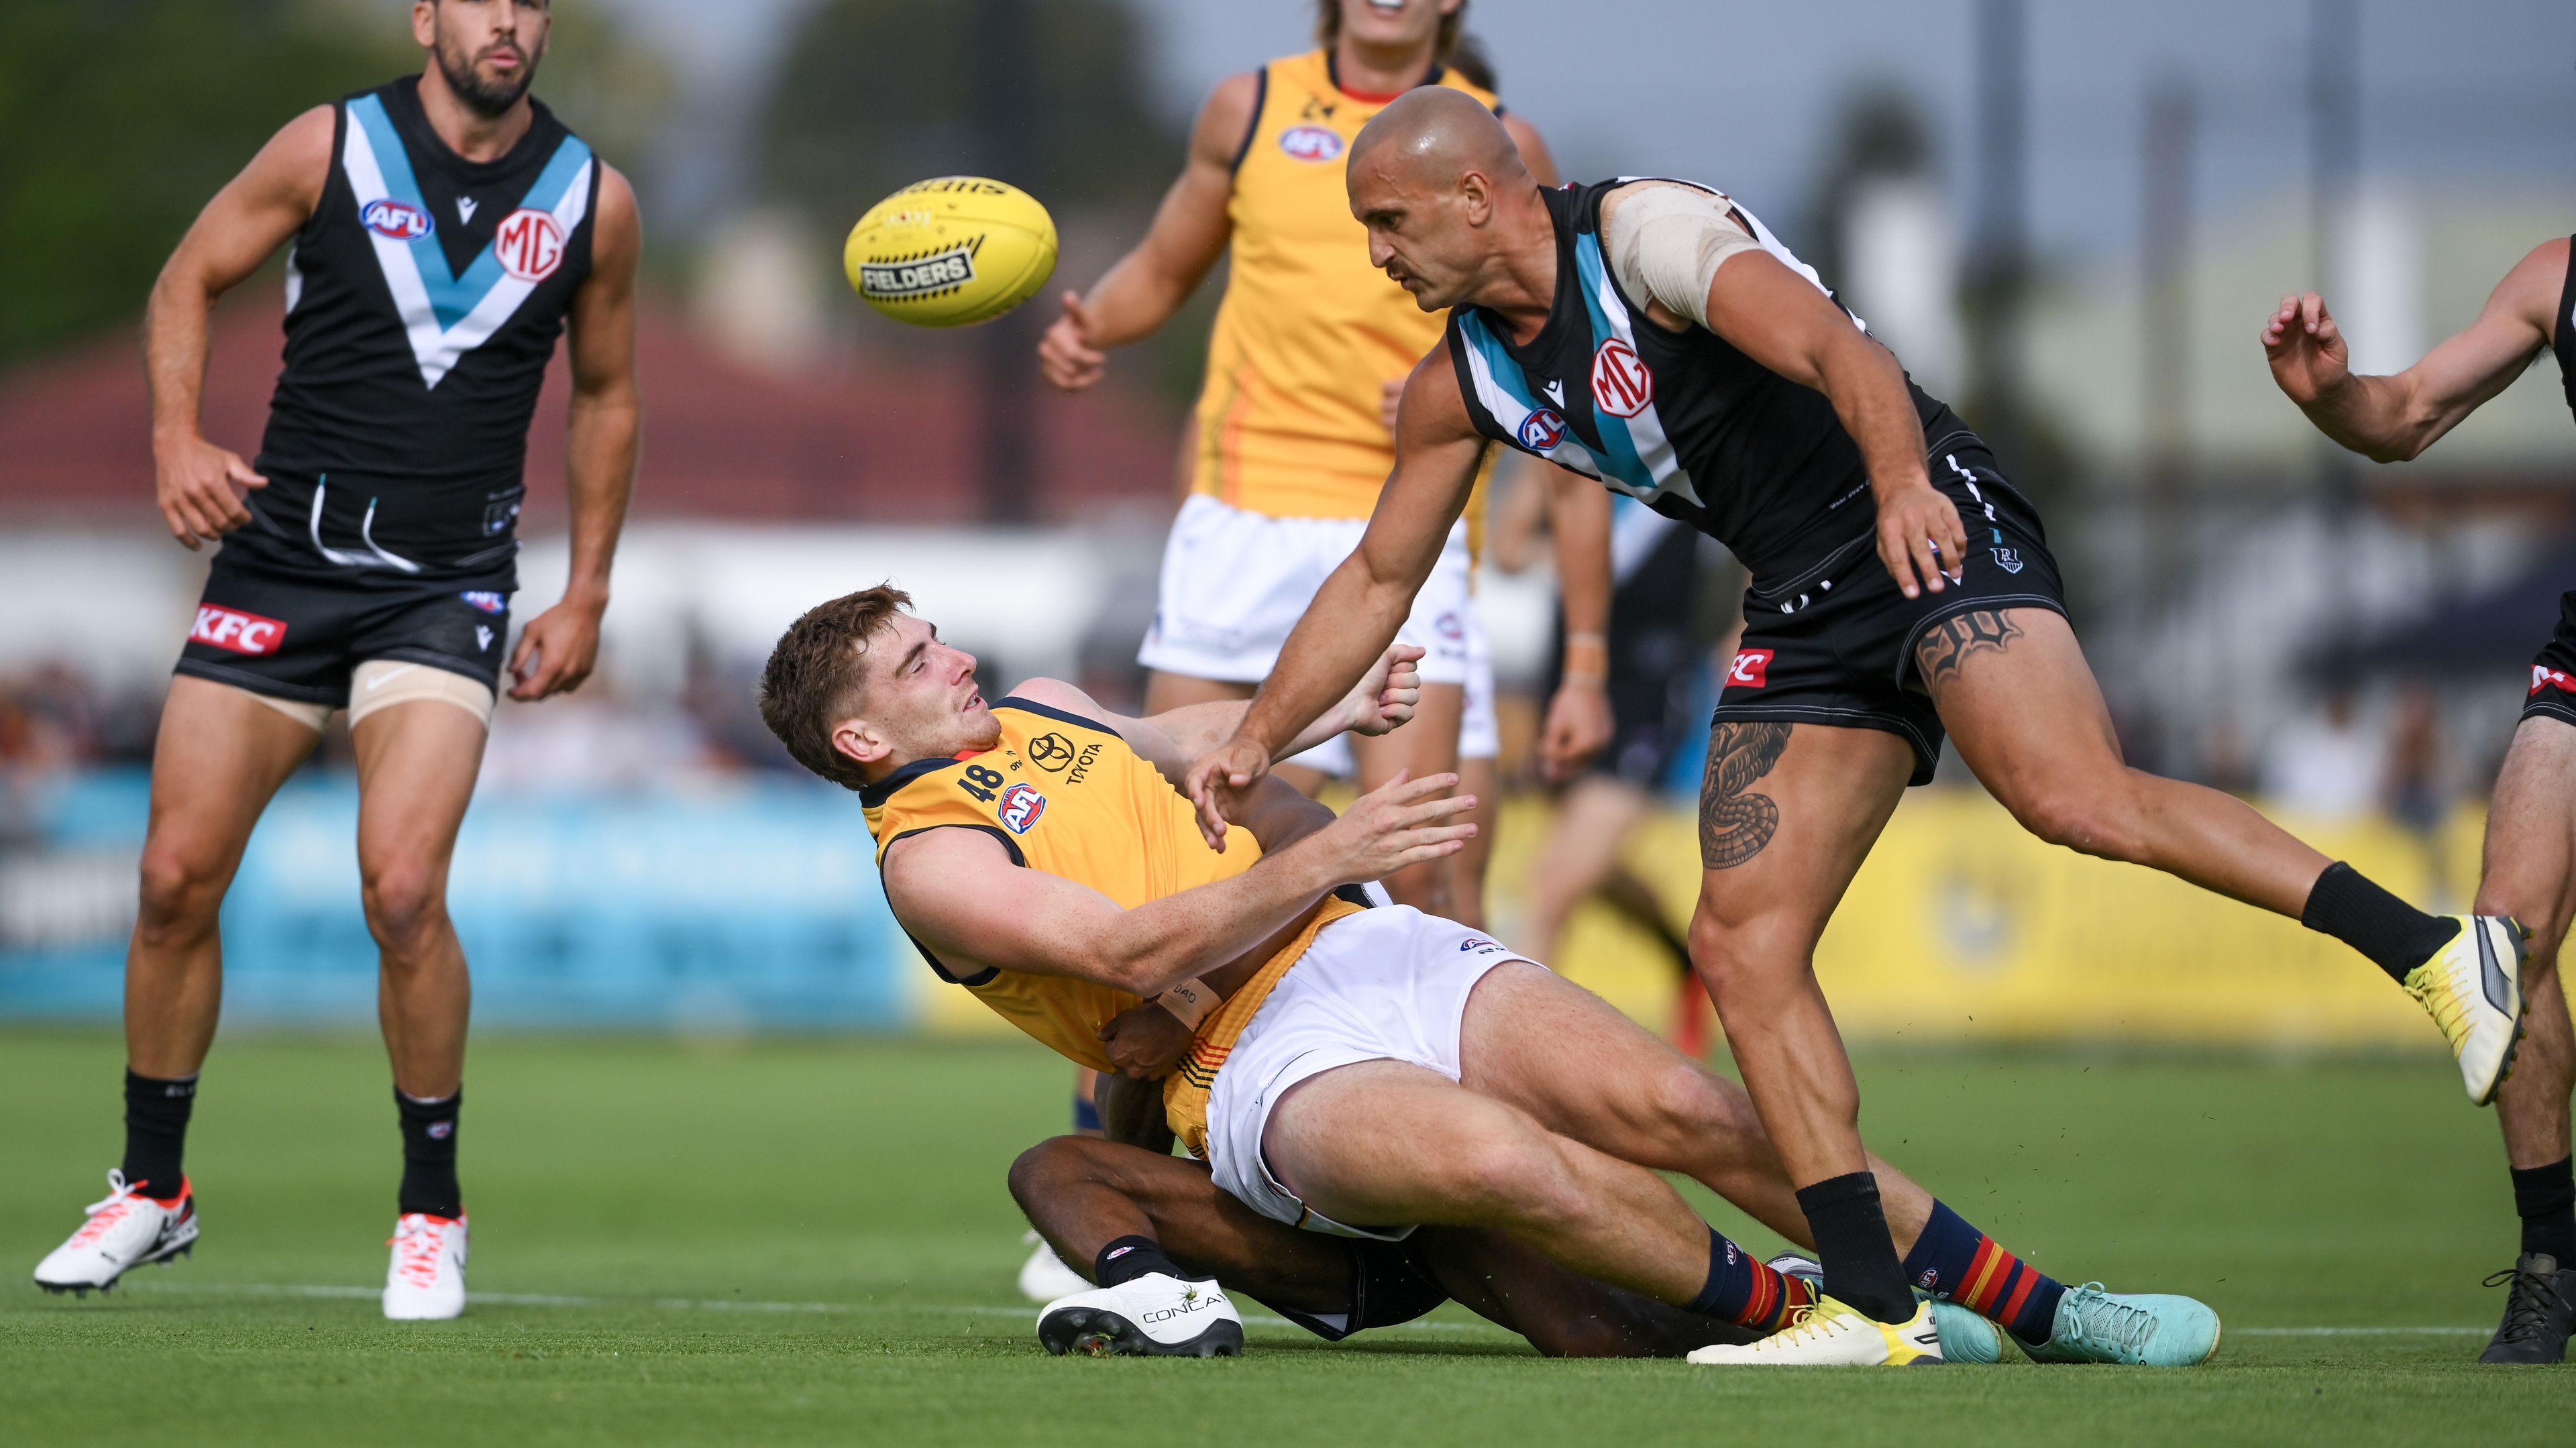 Mark Keane of the Crows  tackled by Willie Rioli of the Power and Sam Powell-Pepper of the Power causing a concussion during an AFL practice match.